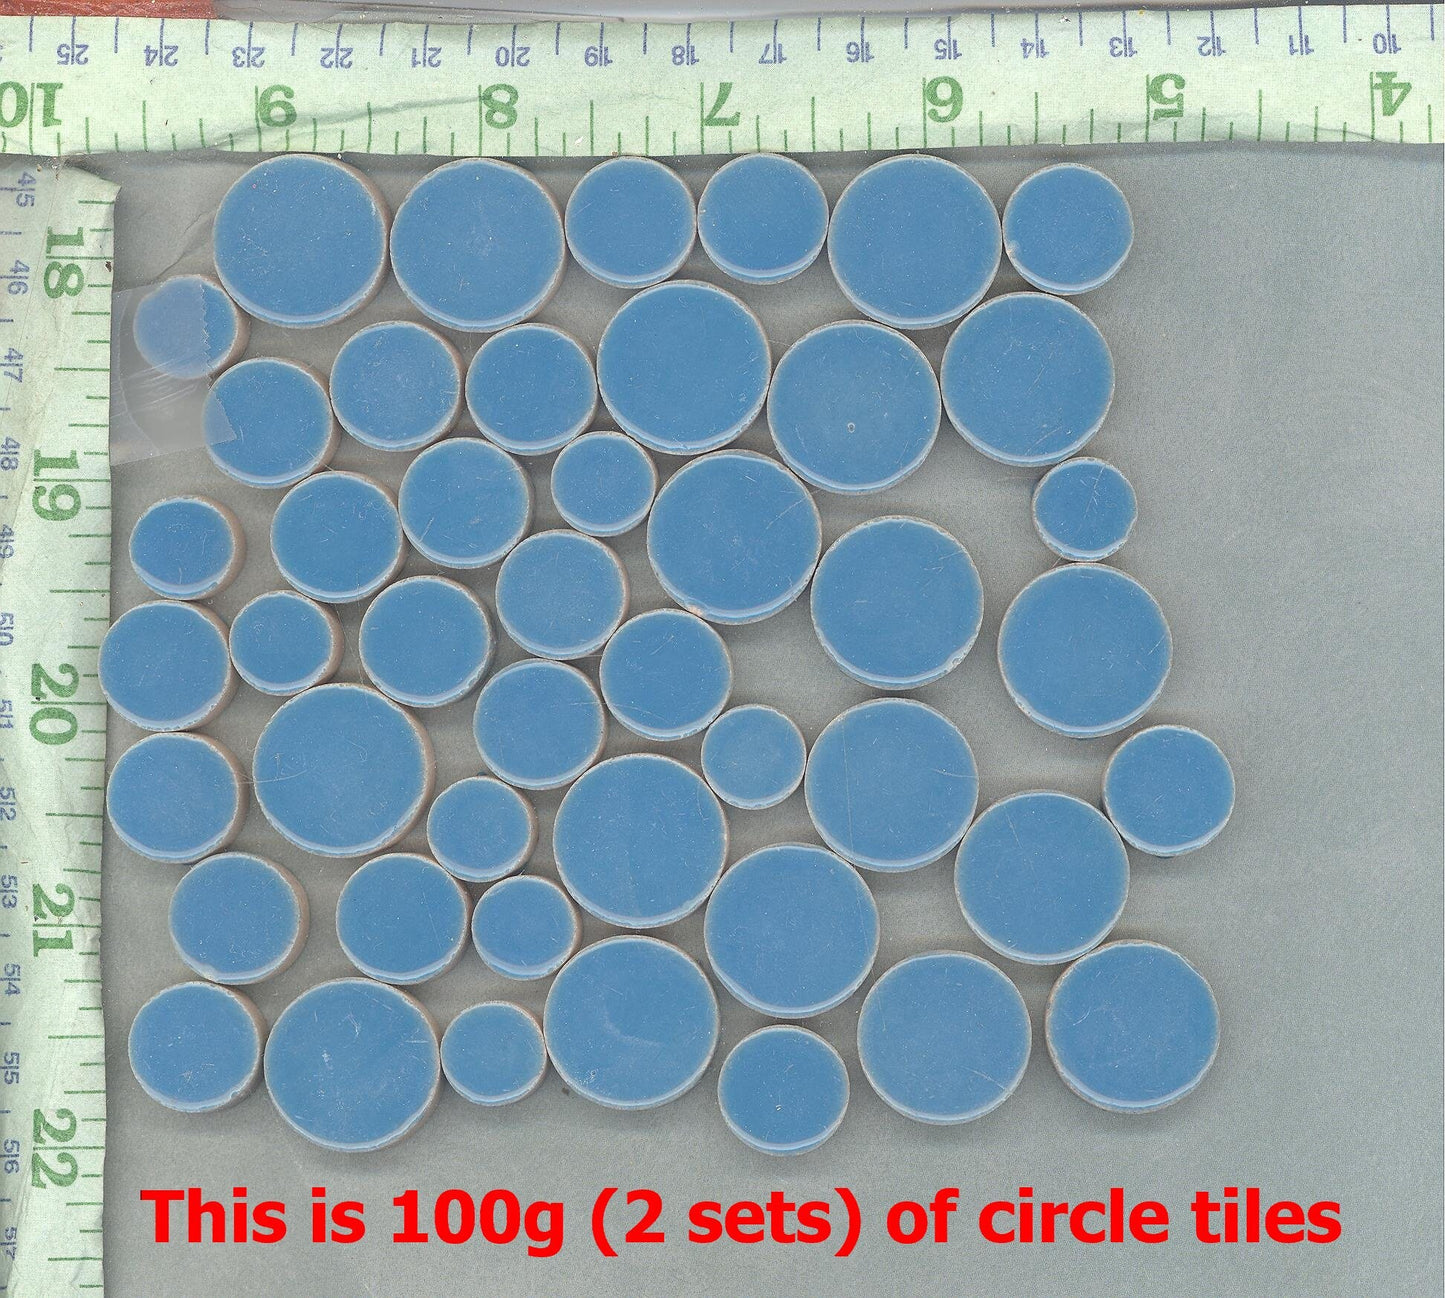 Red Circles Mosaic Tiles - 50g Ceramic in Mix of 3 Sizes 1/2" and 3/4" and 5/8"